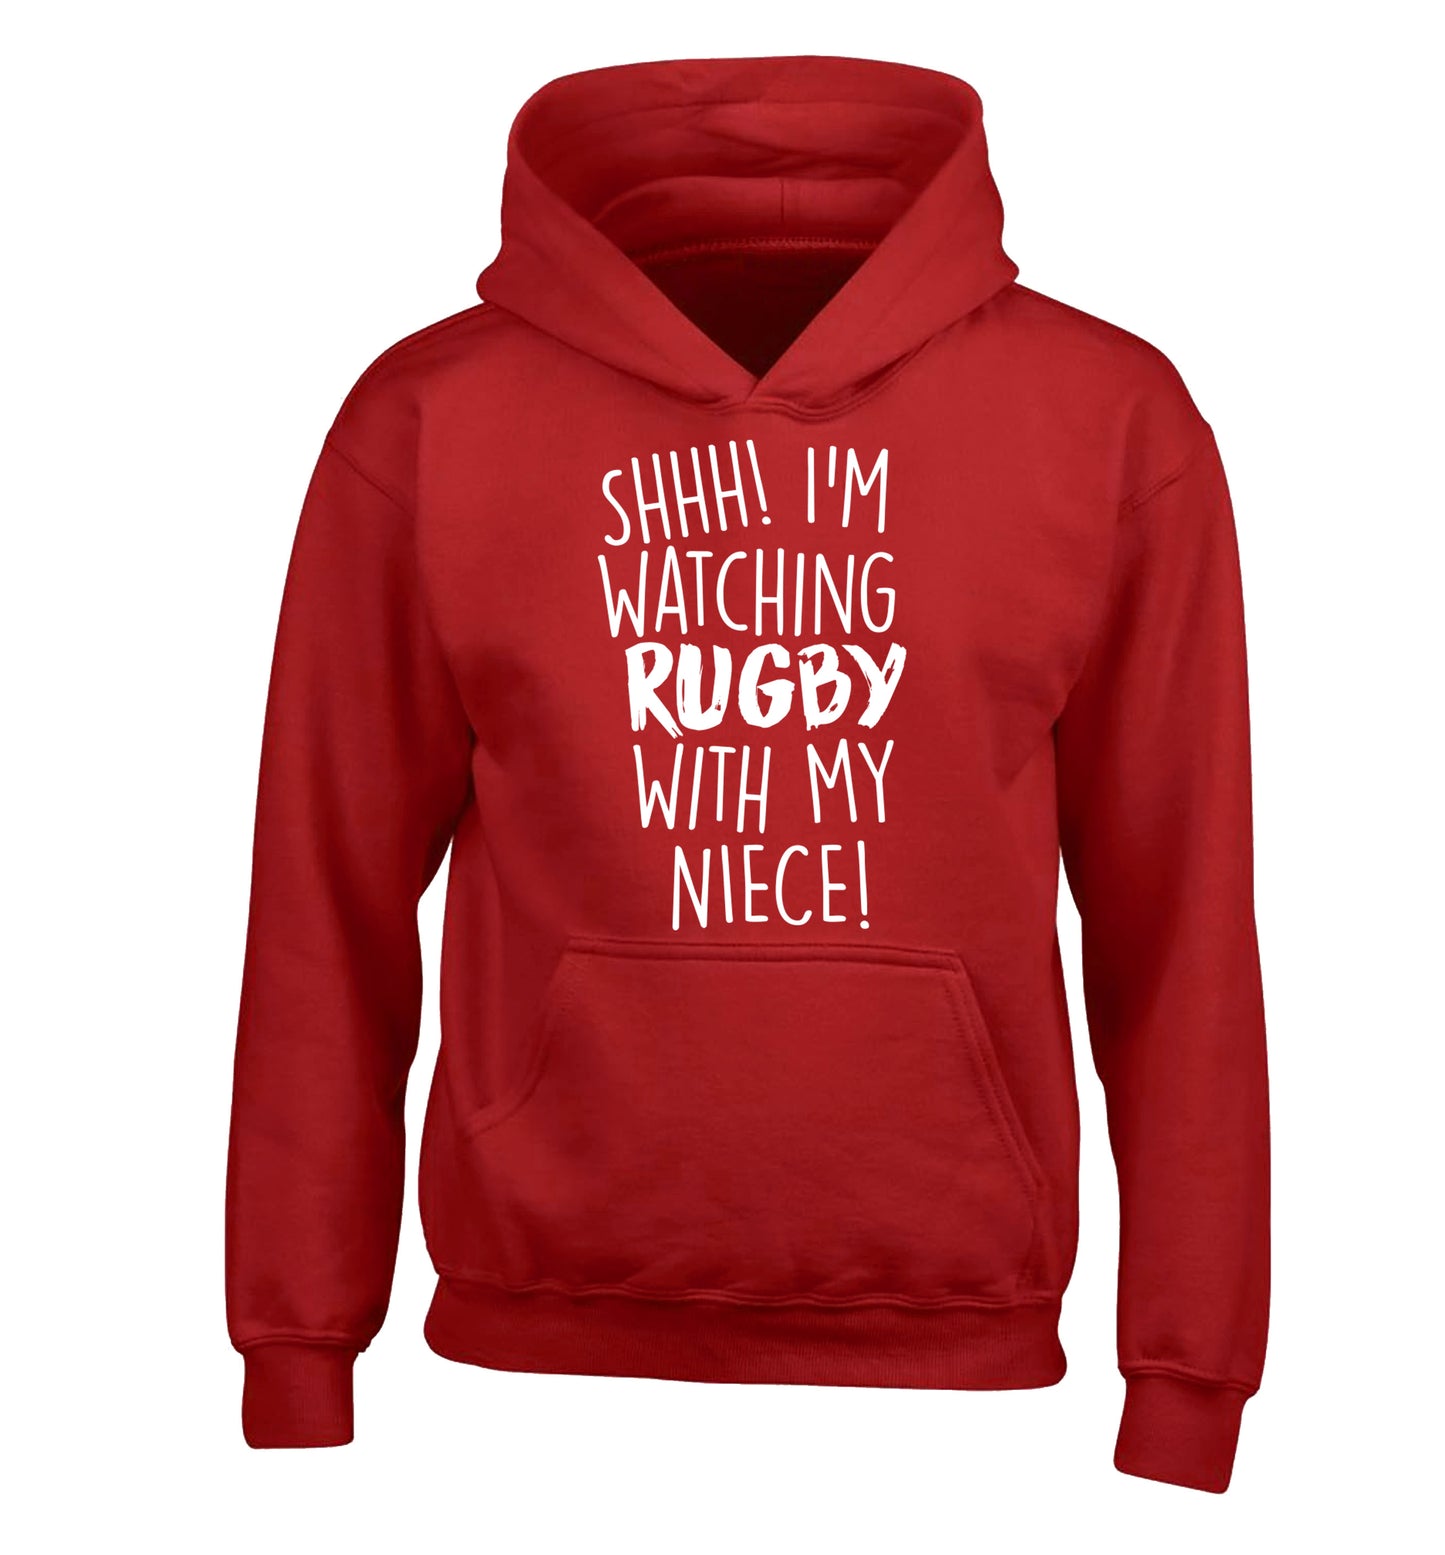 Shh.. I'm watching rugby with my niece children's red hoodie 12-13 Years